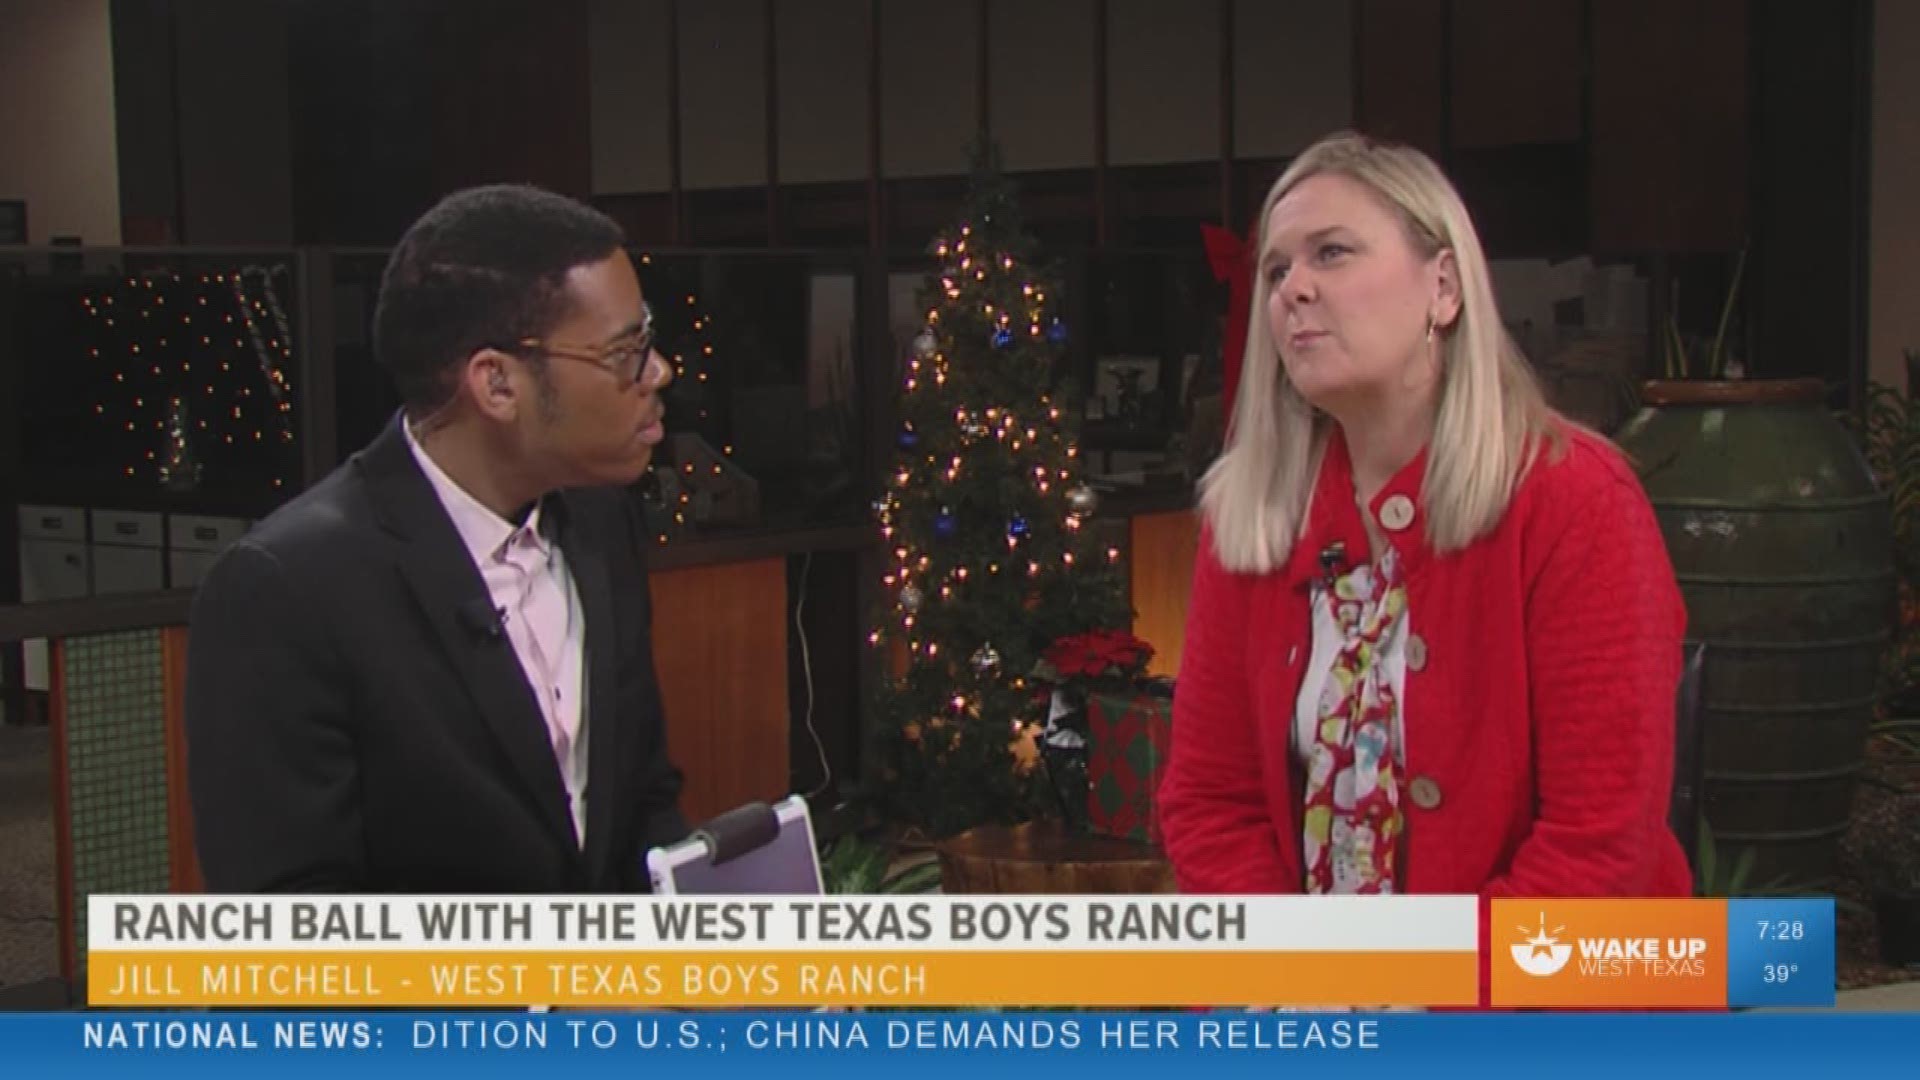 Our Malik Mingo speaks with the West Texas Boys Ranch about their upcoming Ranch Ball in January.